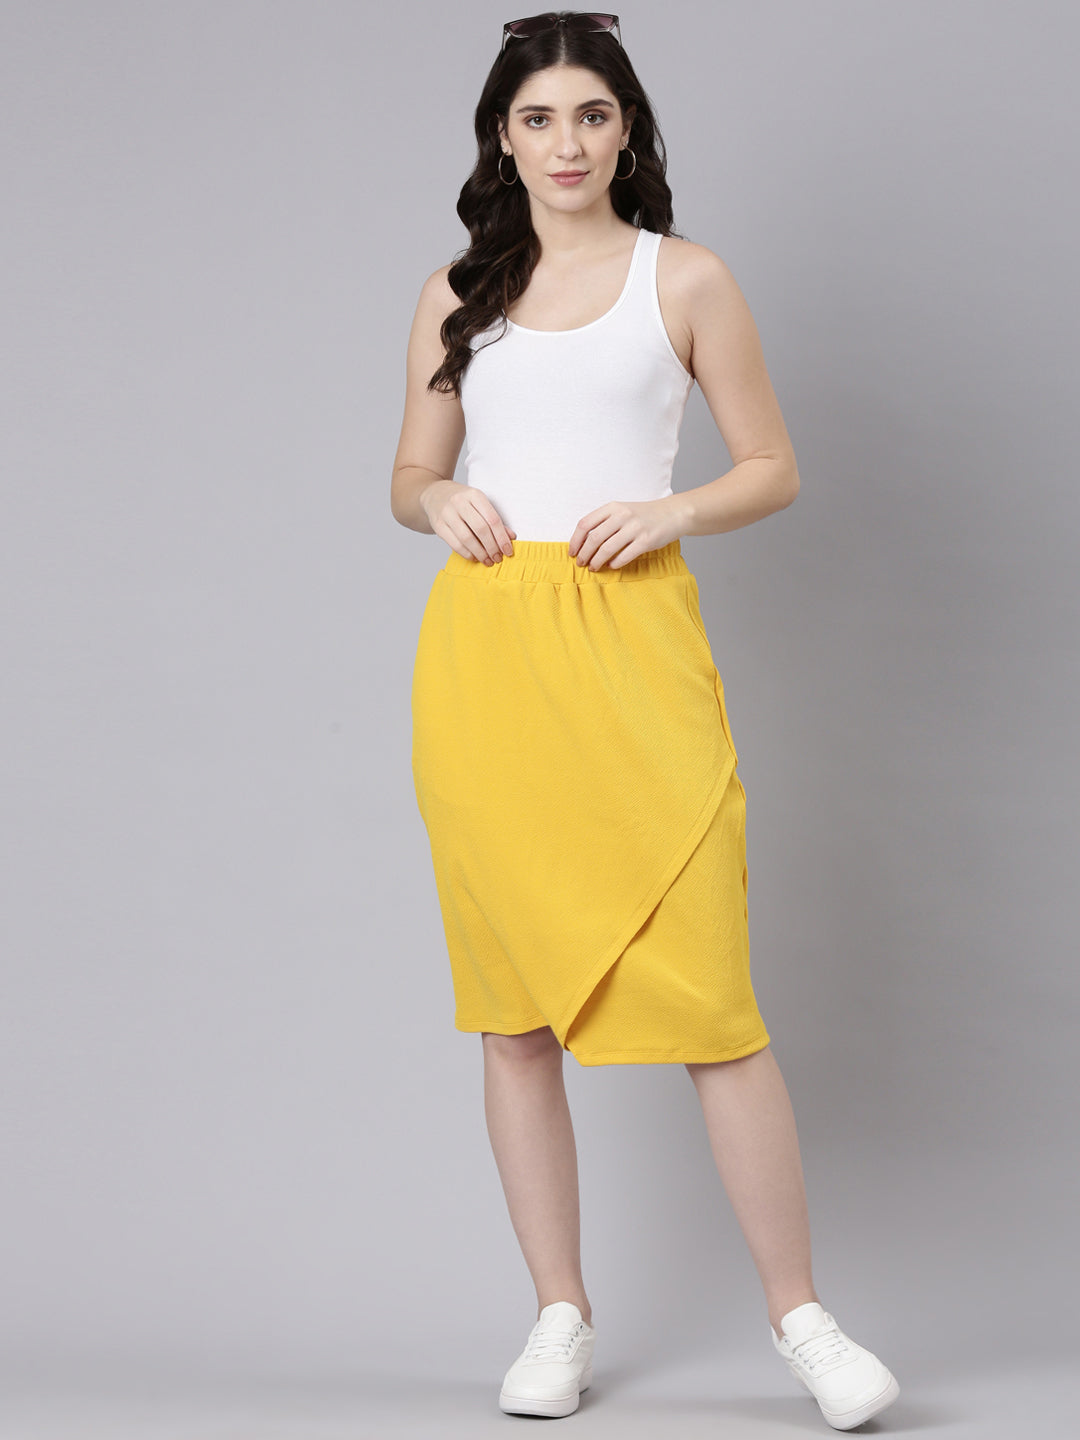 TheShaili Over Lap Skirt for Womens & Girls/Classic Stretchy All Time Trendy fit Over Lap Skirt with Elasticated Waistband - Yellow/for Office Party